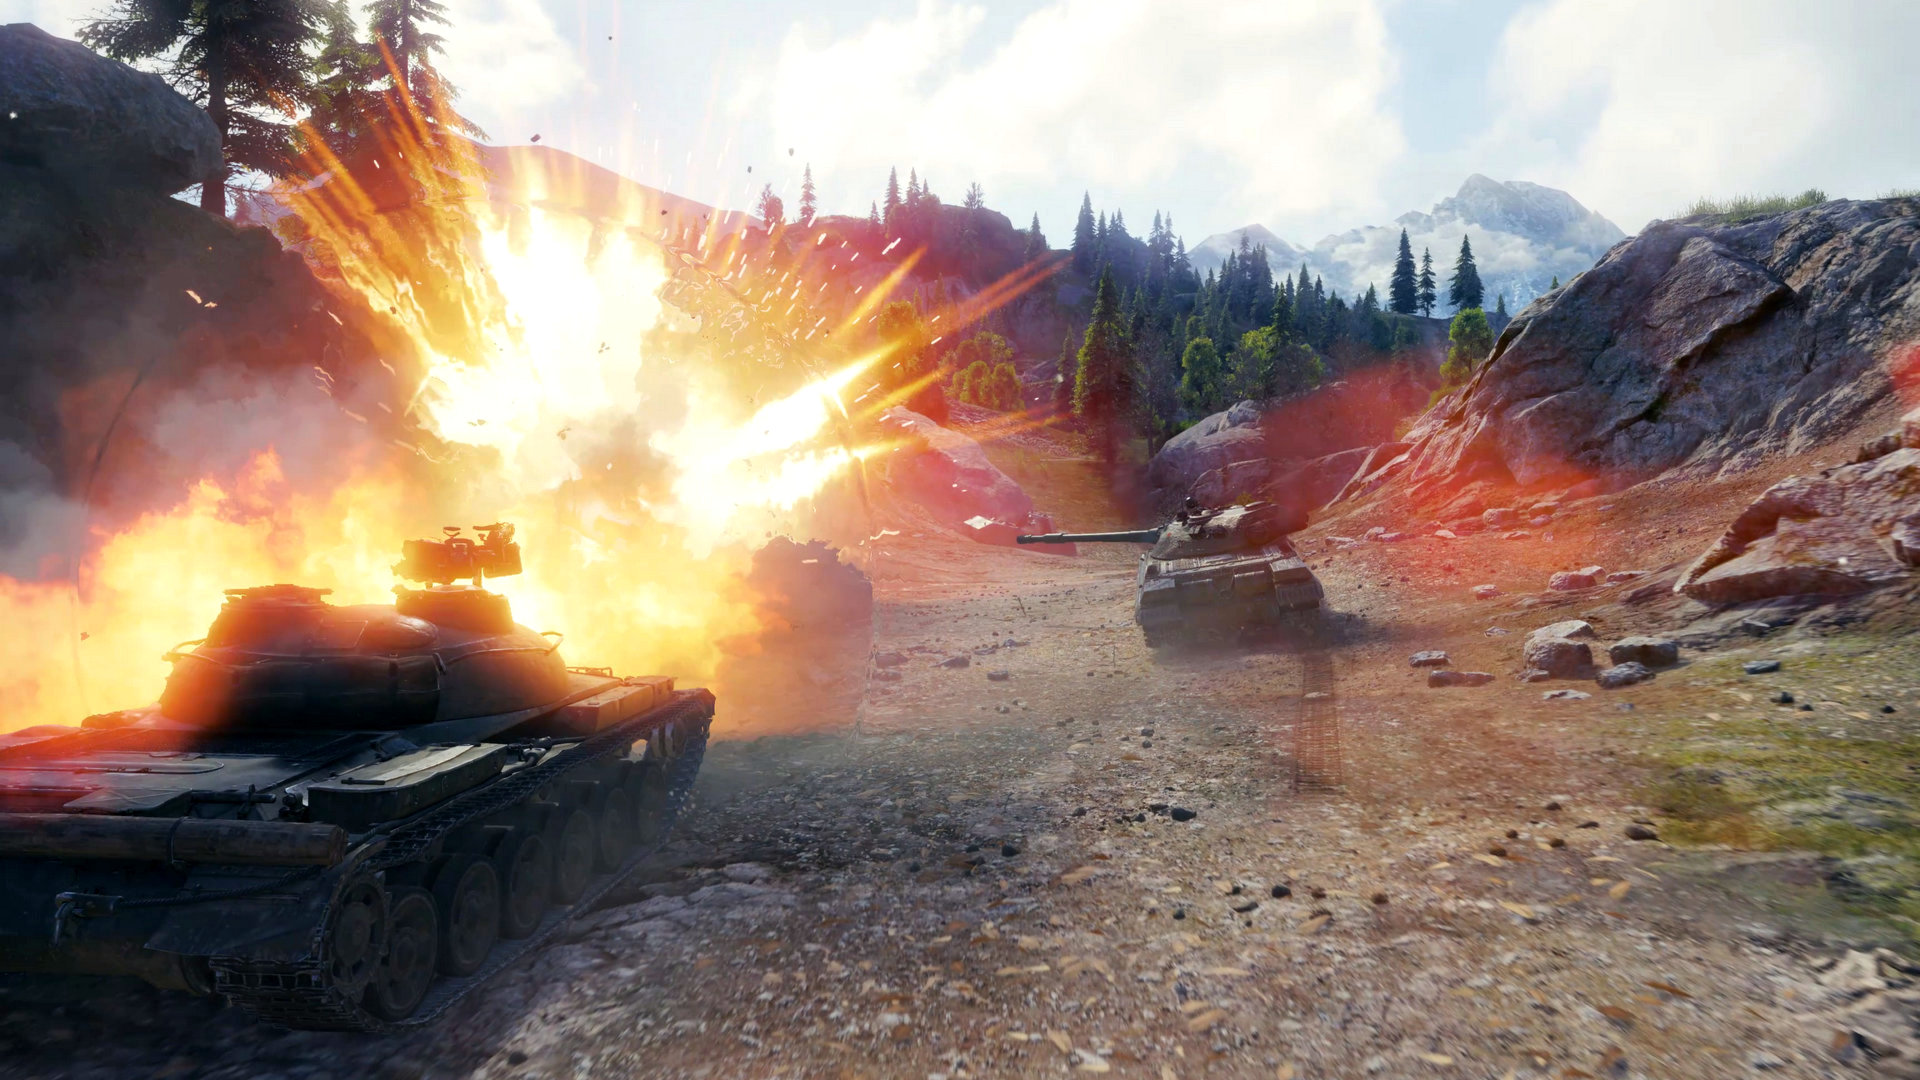 World of Tanks is giving seven days' free premium access to new players this month